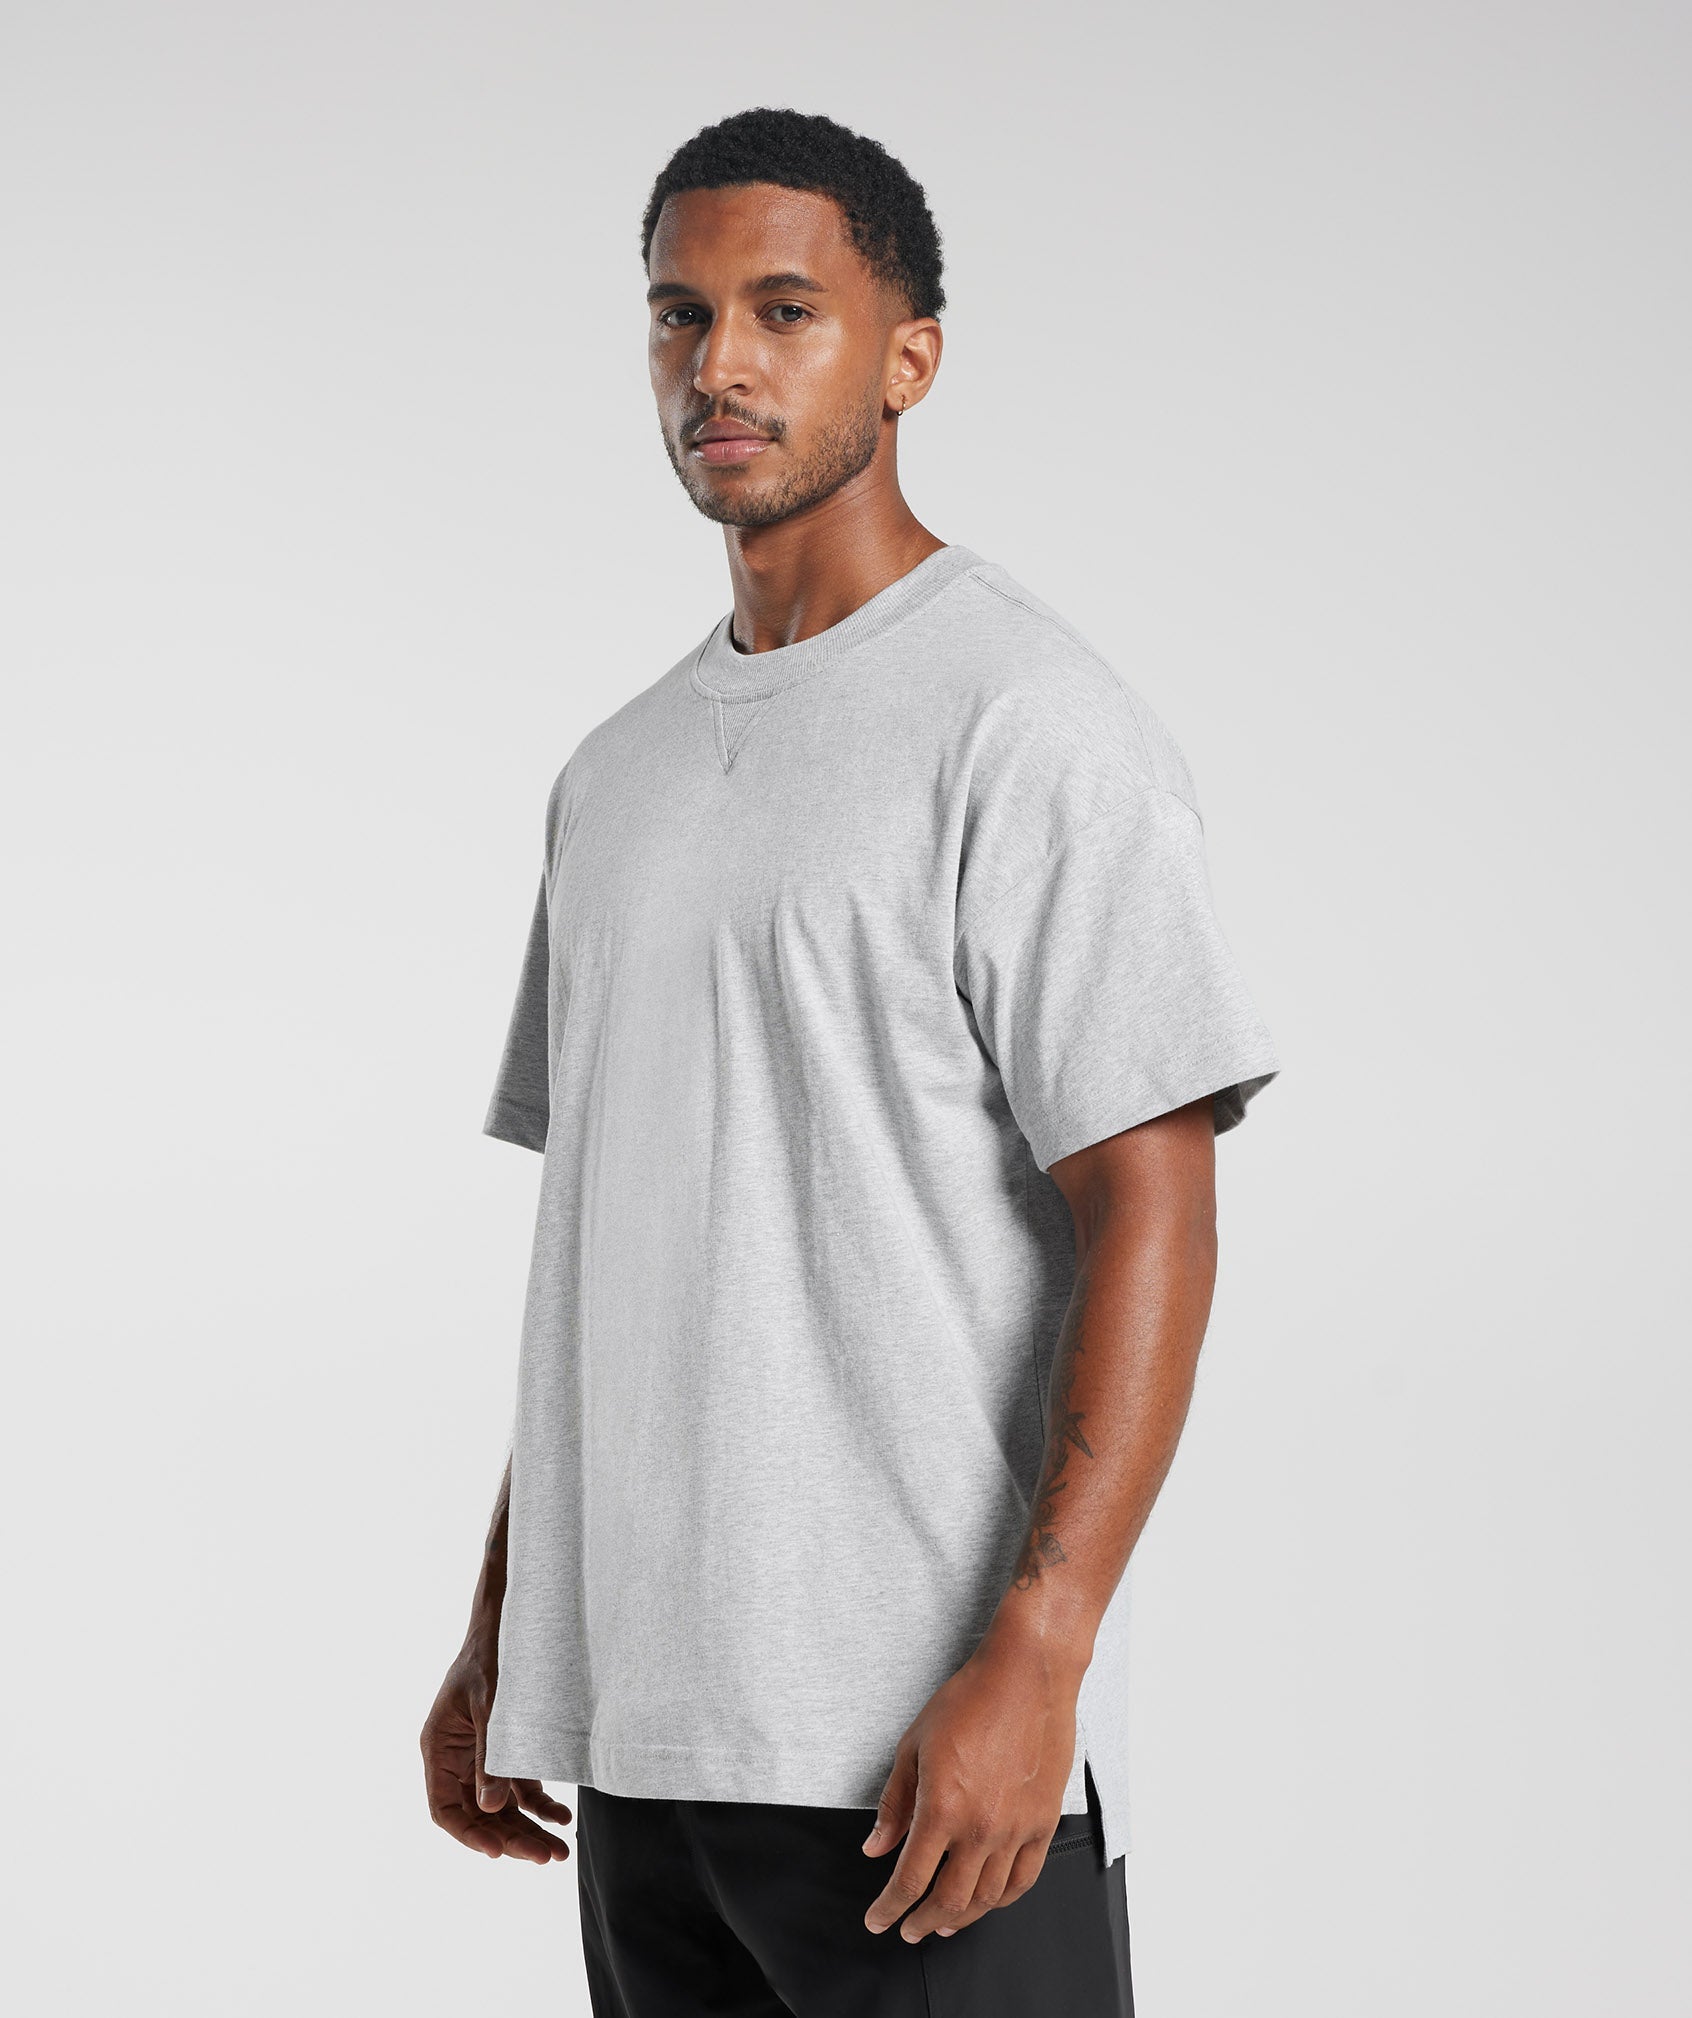 Rest Day Essentials T-Shirt in Light Grey Core Marl - view 3